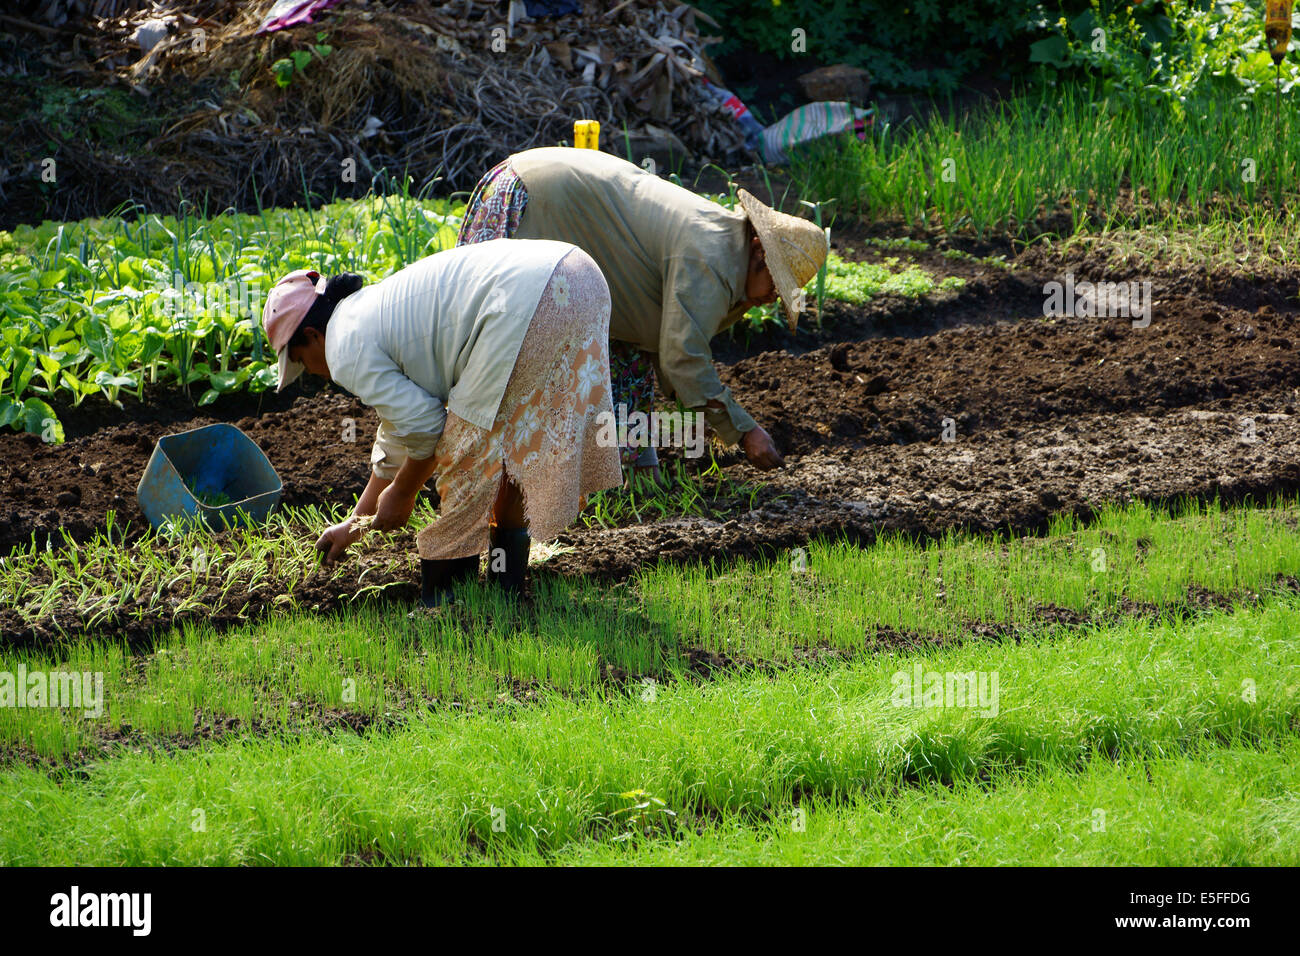 Woman planting  onions in vegetable garden, east coast Island Mauritius Stock Photo